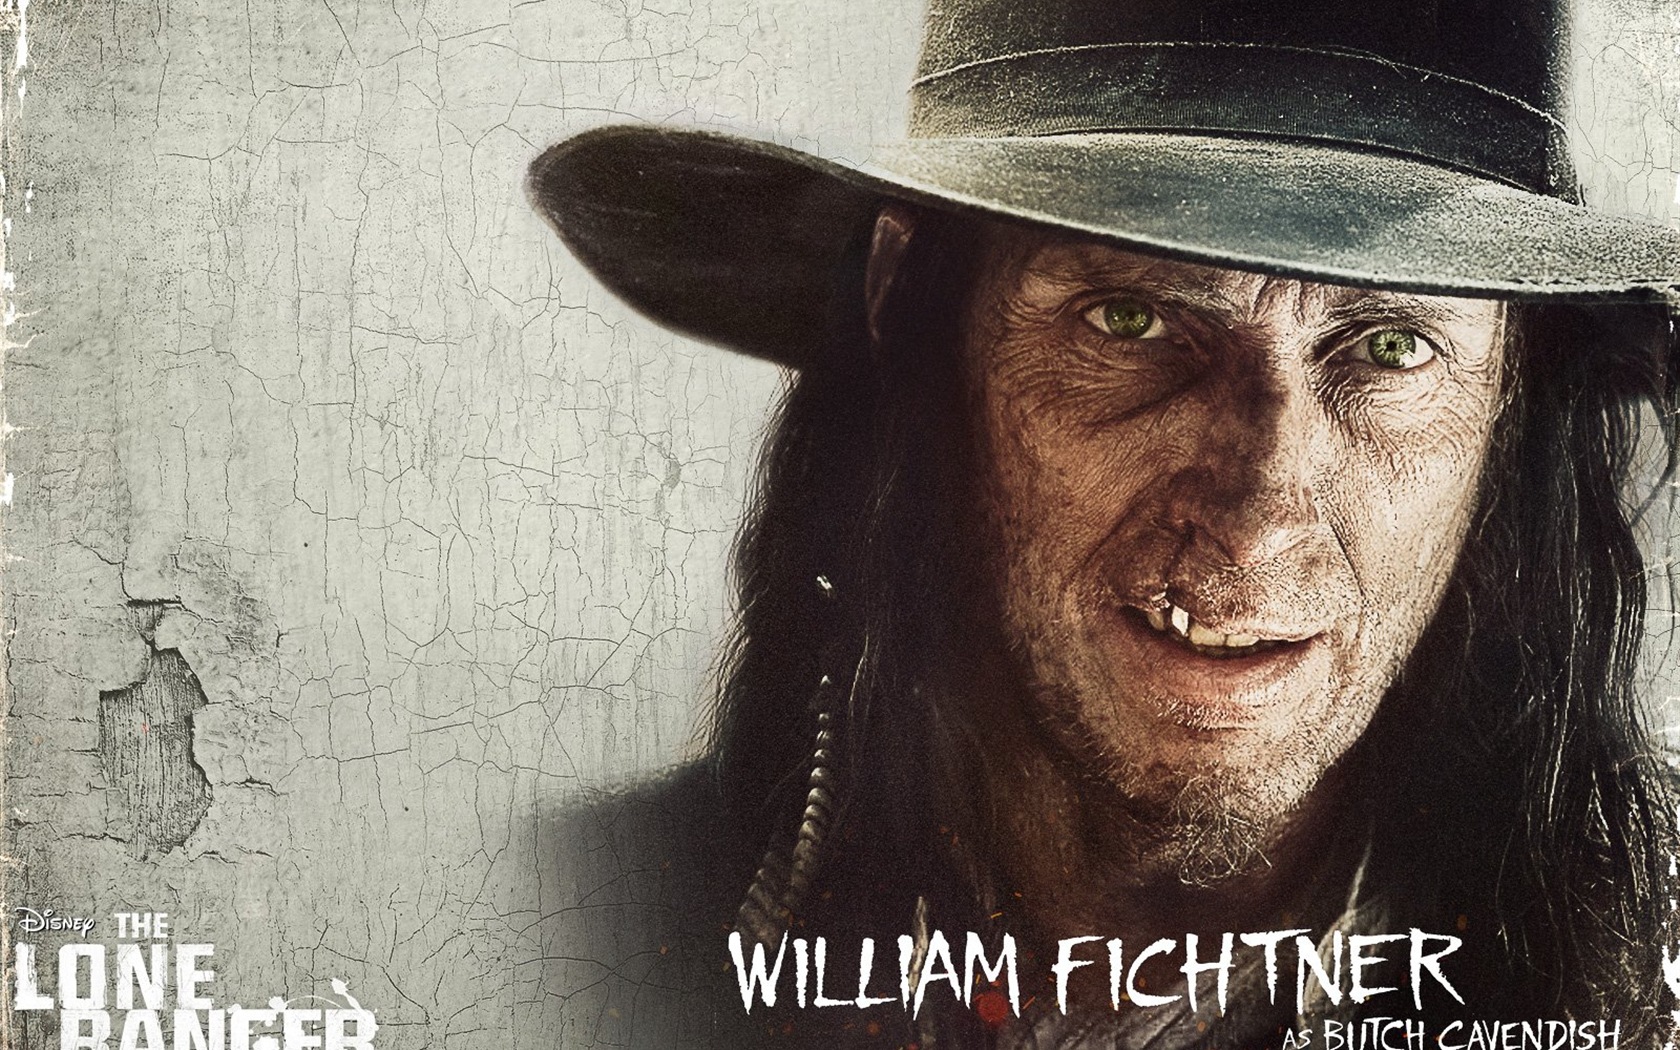 The Lone Ranger HD movie wallpapers #11 - 1680x1050